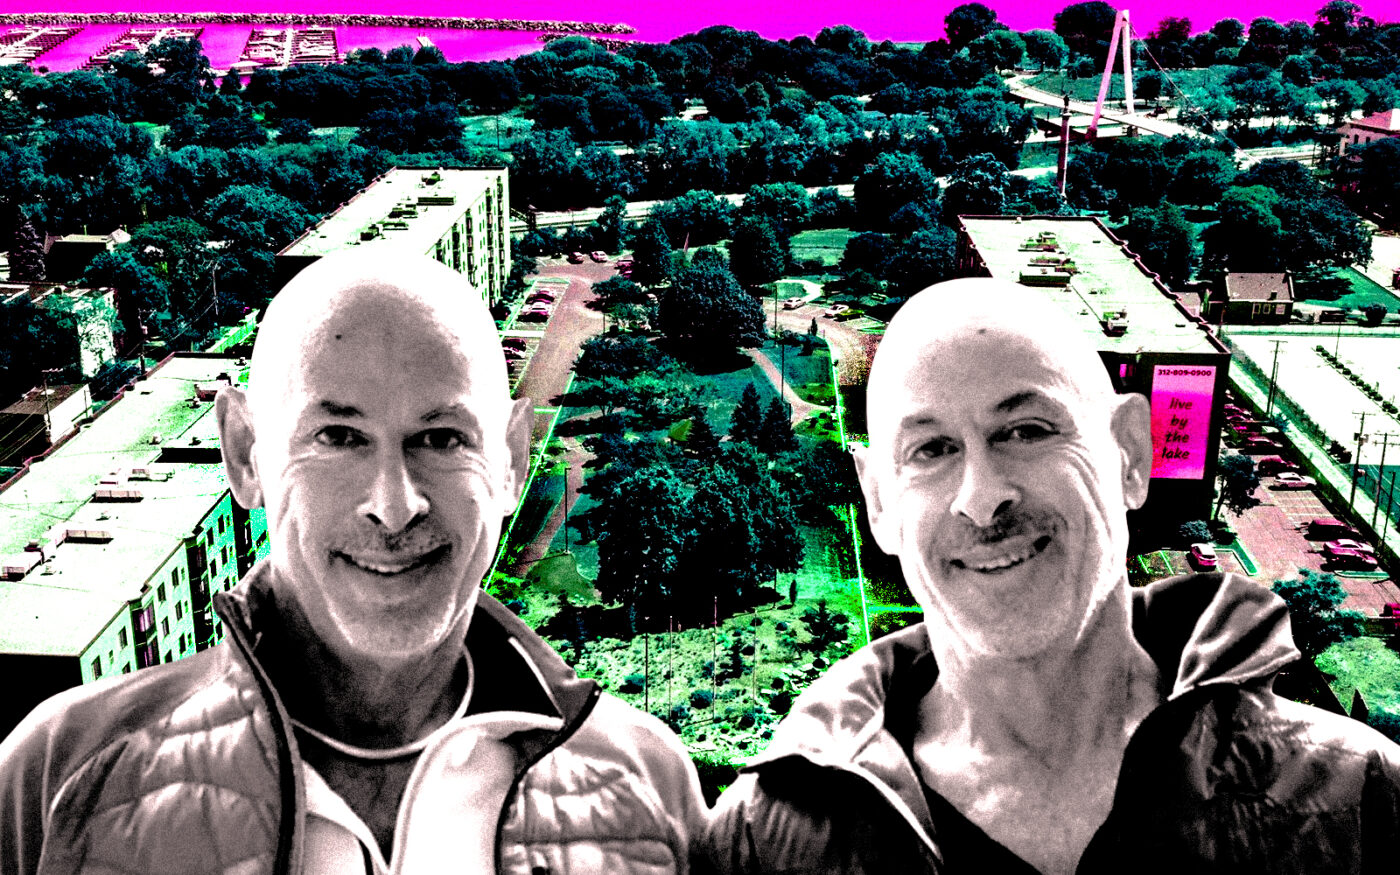 From left: South Side Stories Property Management's Jon and Julian Mickelson and Woodland Park by the Lake at 3243 South Cottage Grove Avenue in Bronzeville (Getty, South Side Stories Property Management, Woodland Park by the Lake)